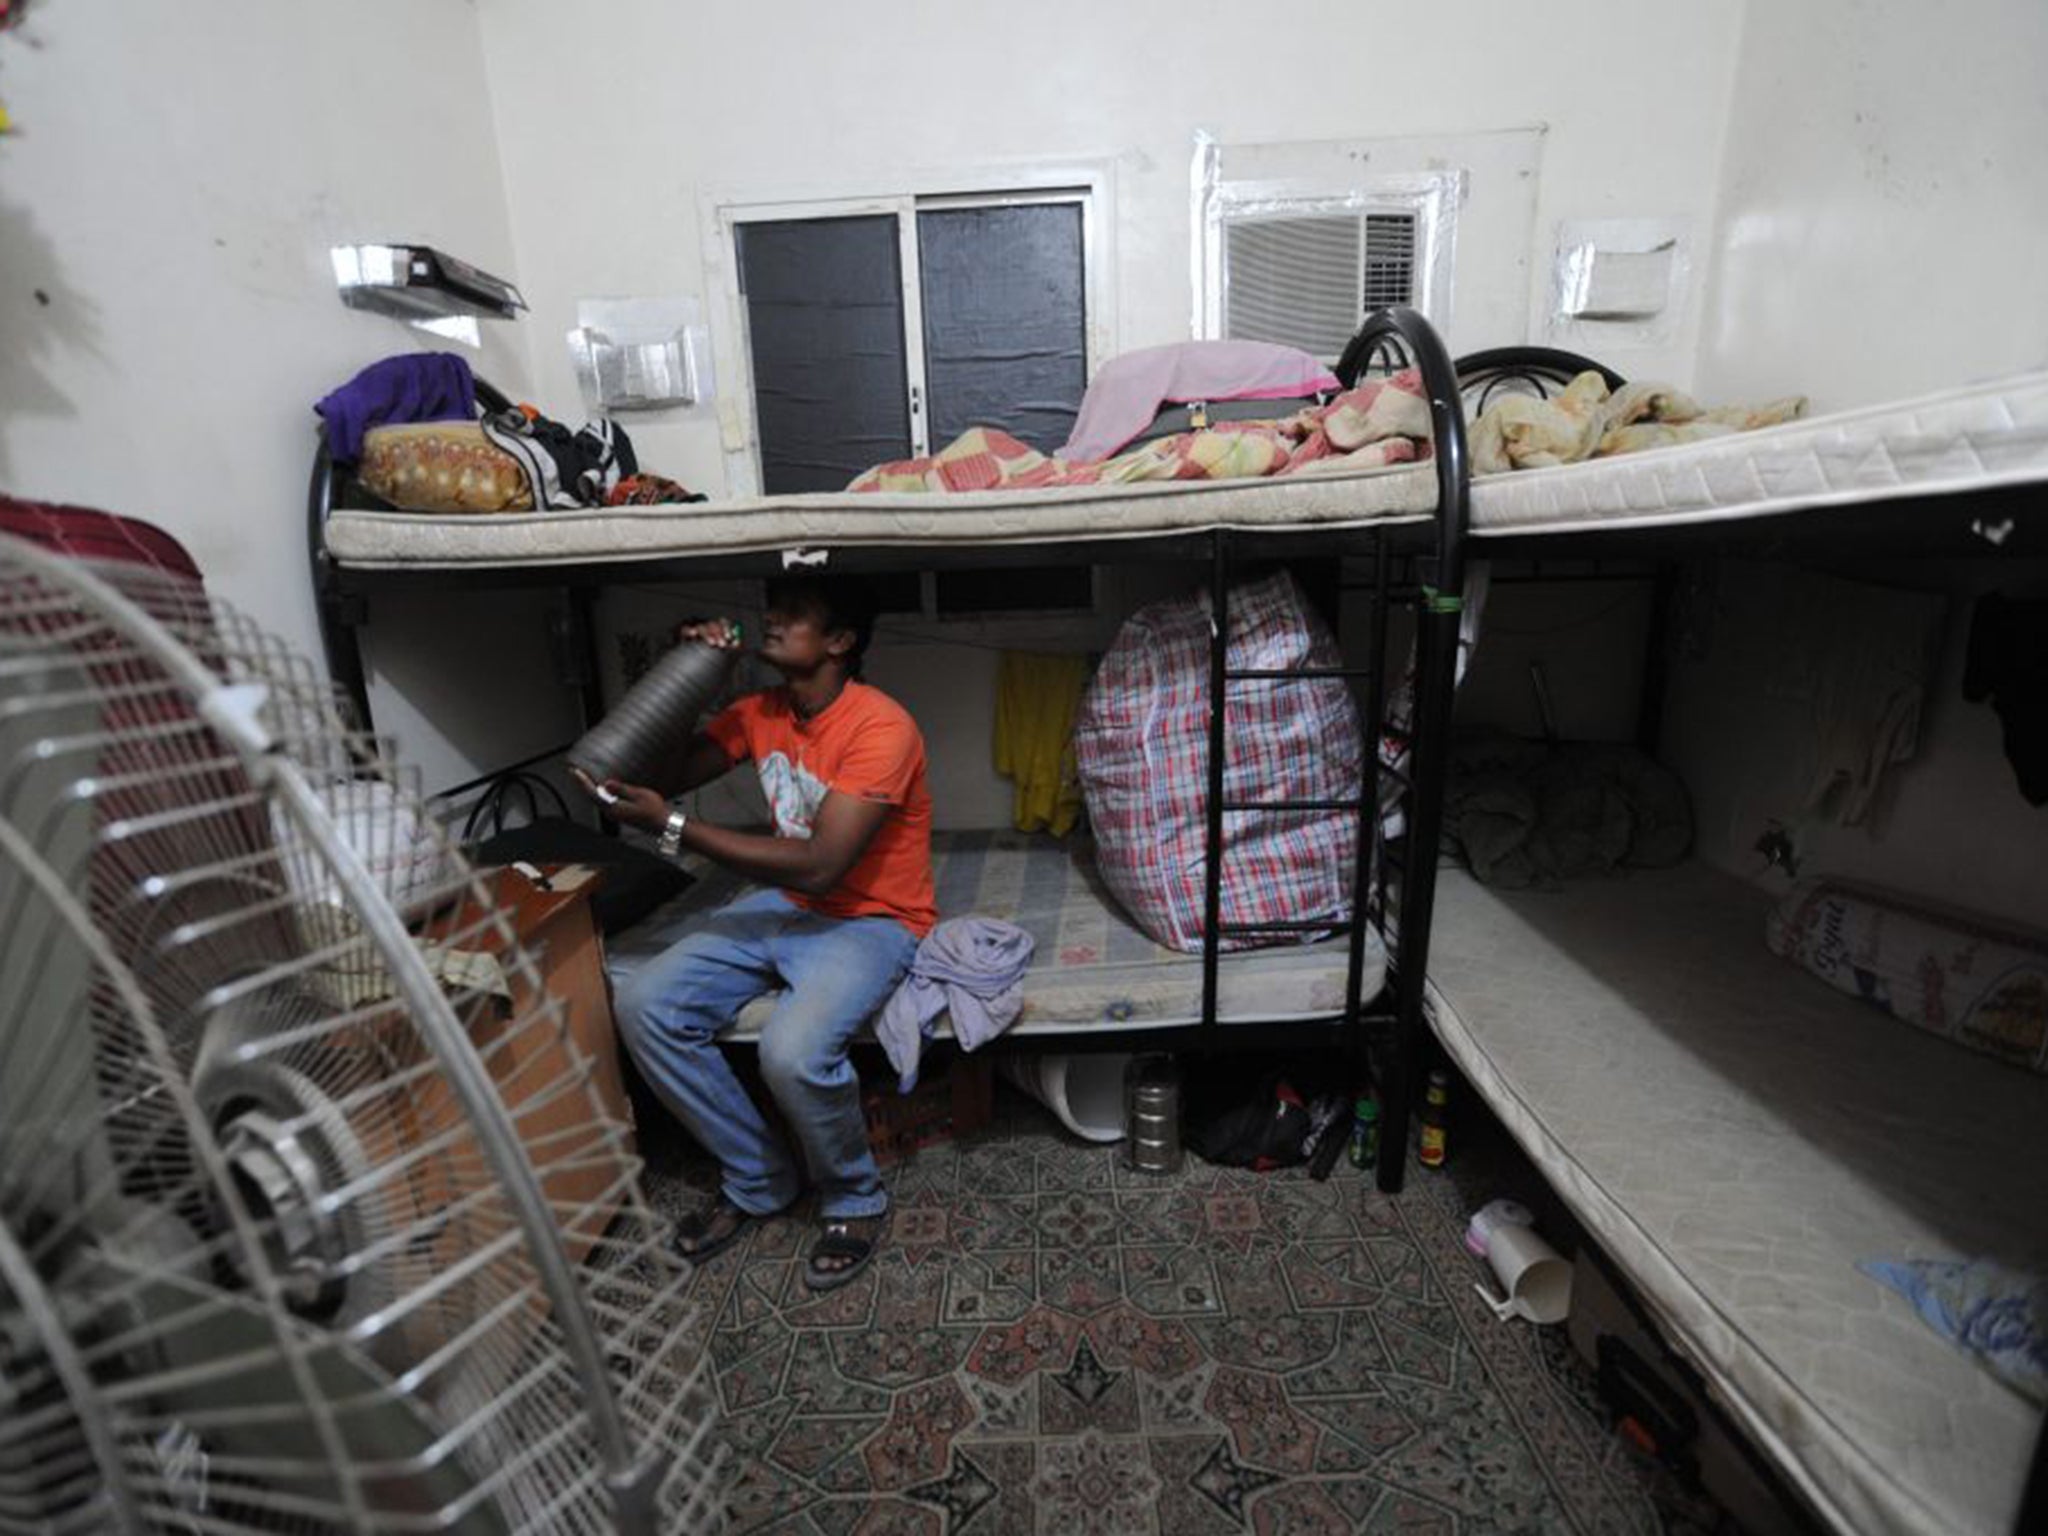 Many migrant workers employed to help build the World Cup infrastructure in Qatar have been living in squalid conditions